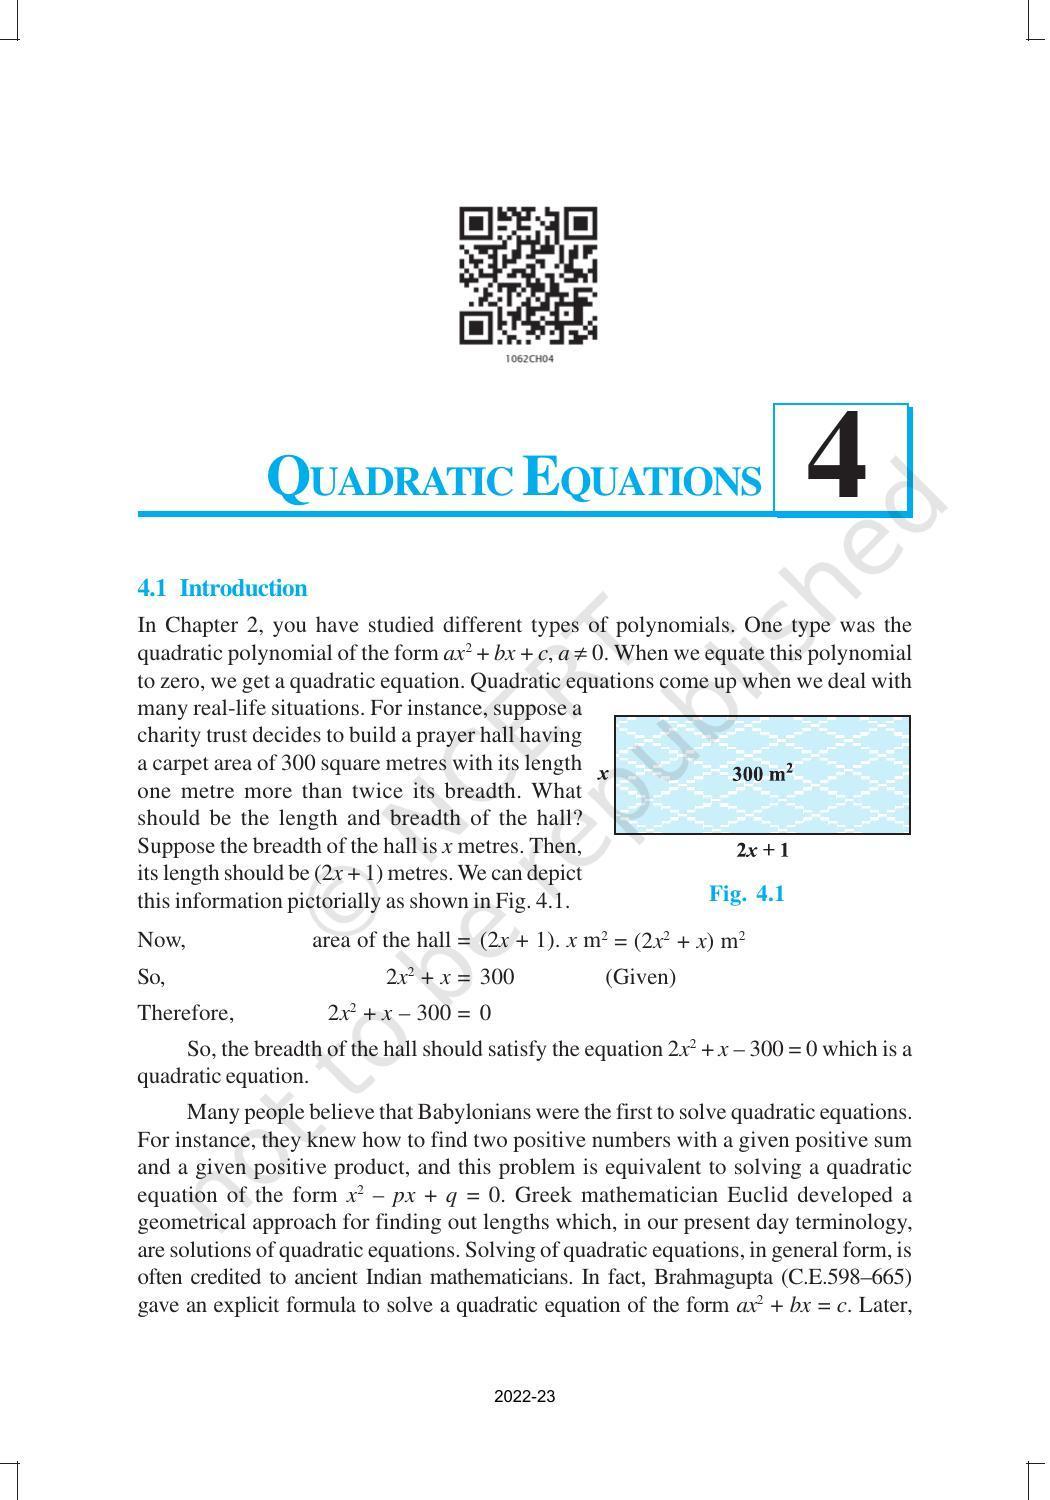 NCERT Book for Class 10 Maths Chapter 4 Quadratic Equations - Page 1